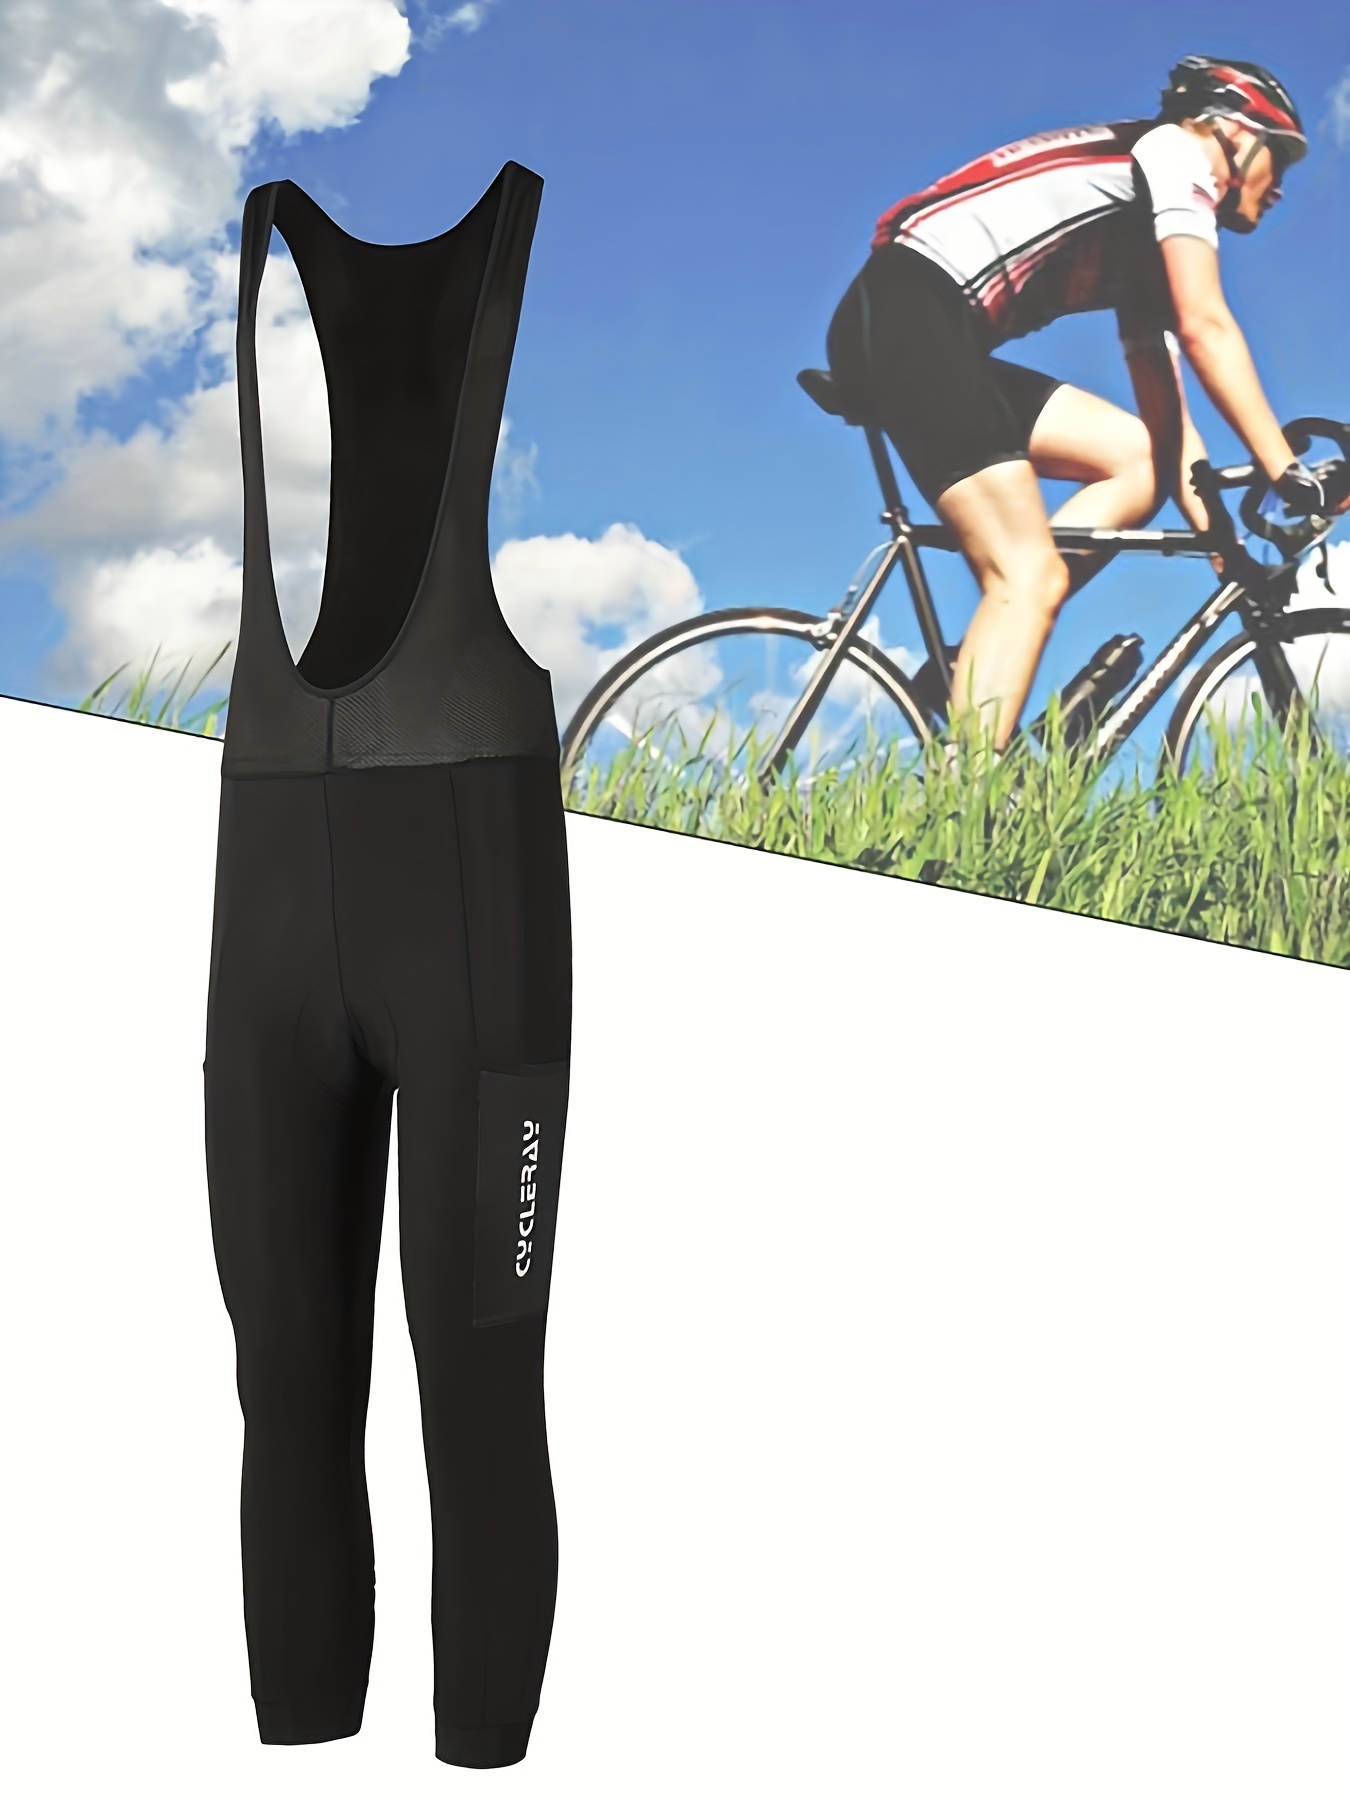  Women's 4D Padded Bike Underwear Cycling Bicycle